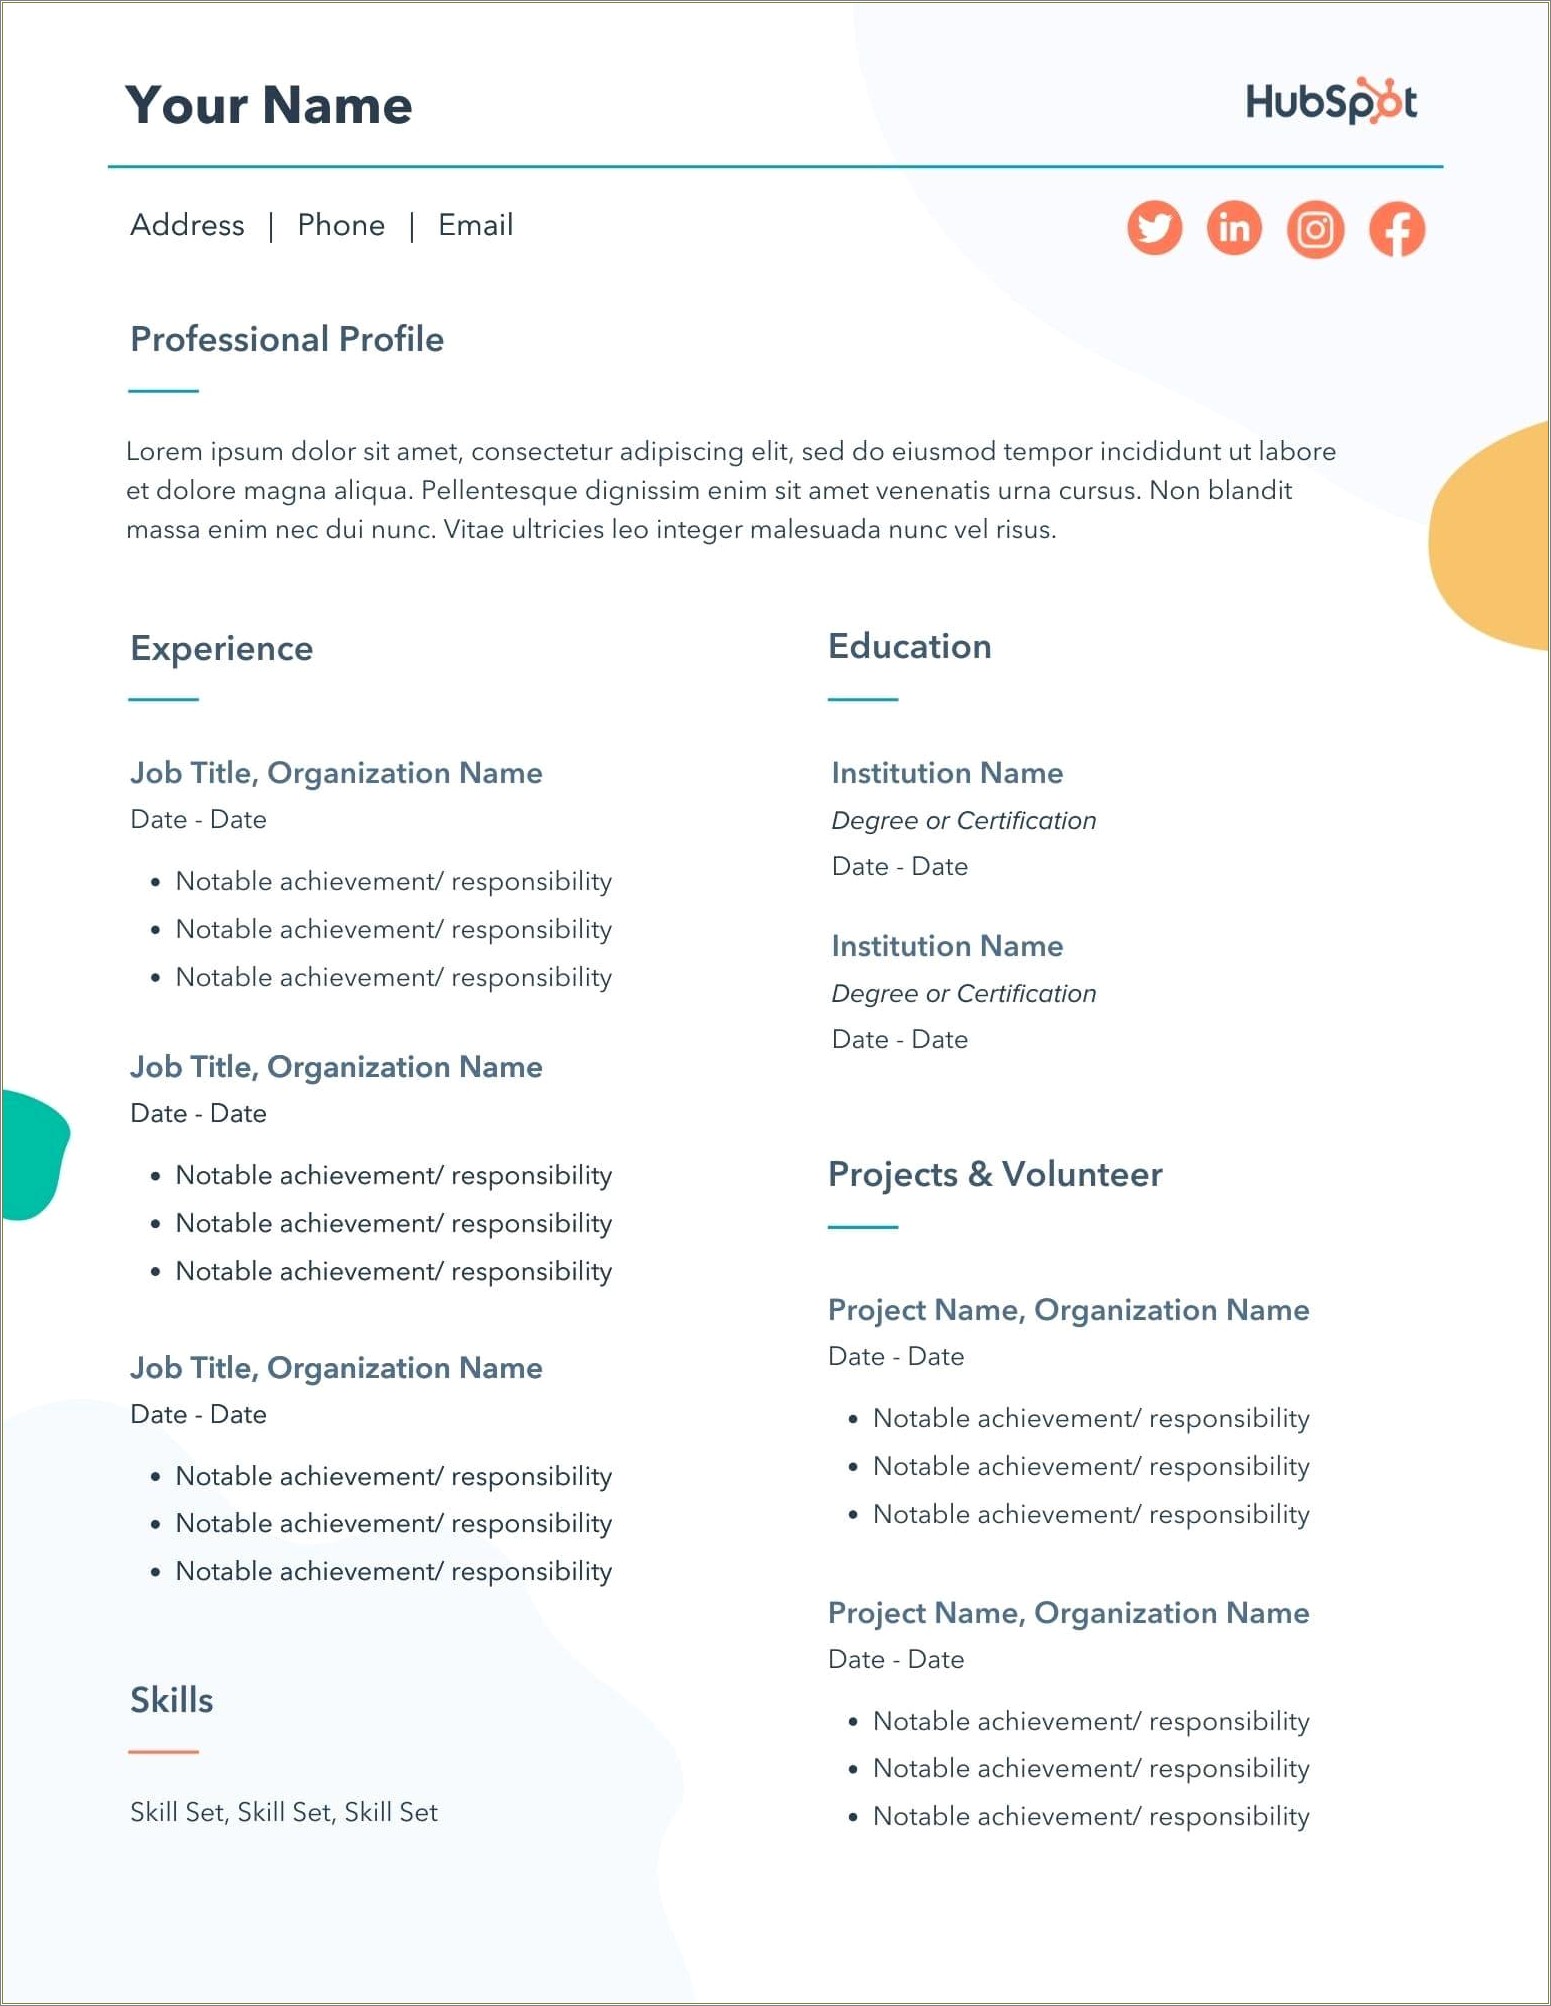 Sample Resume With Little Job Experience